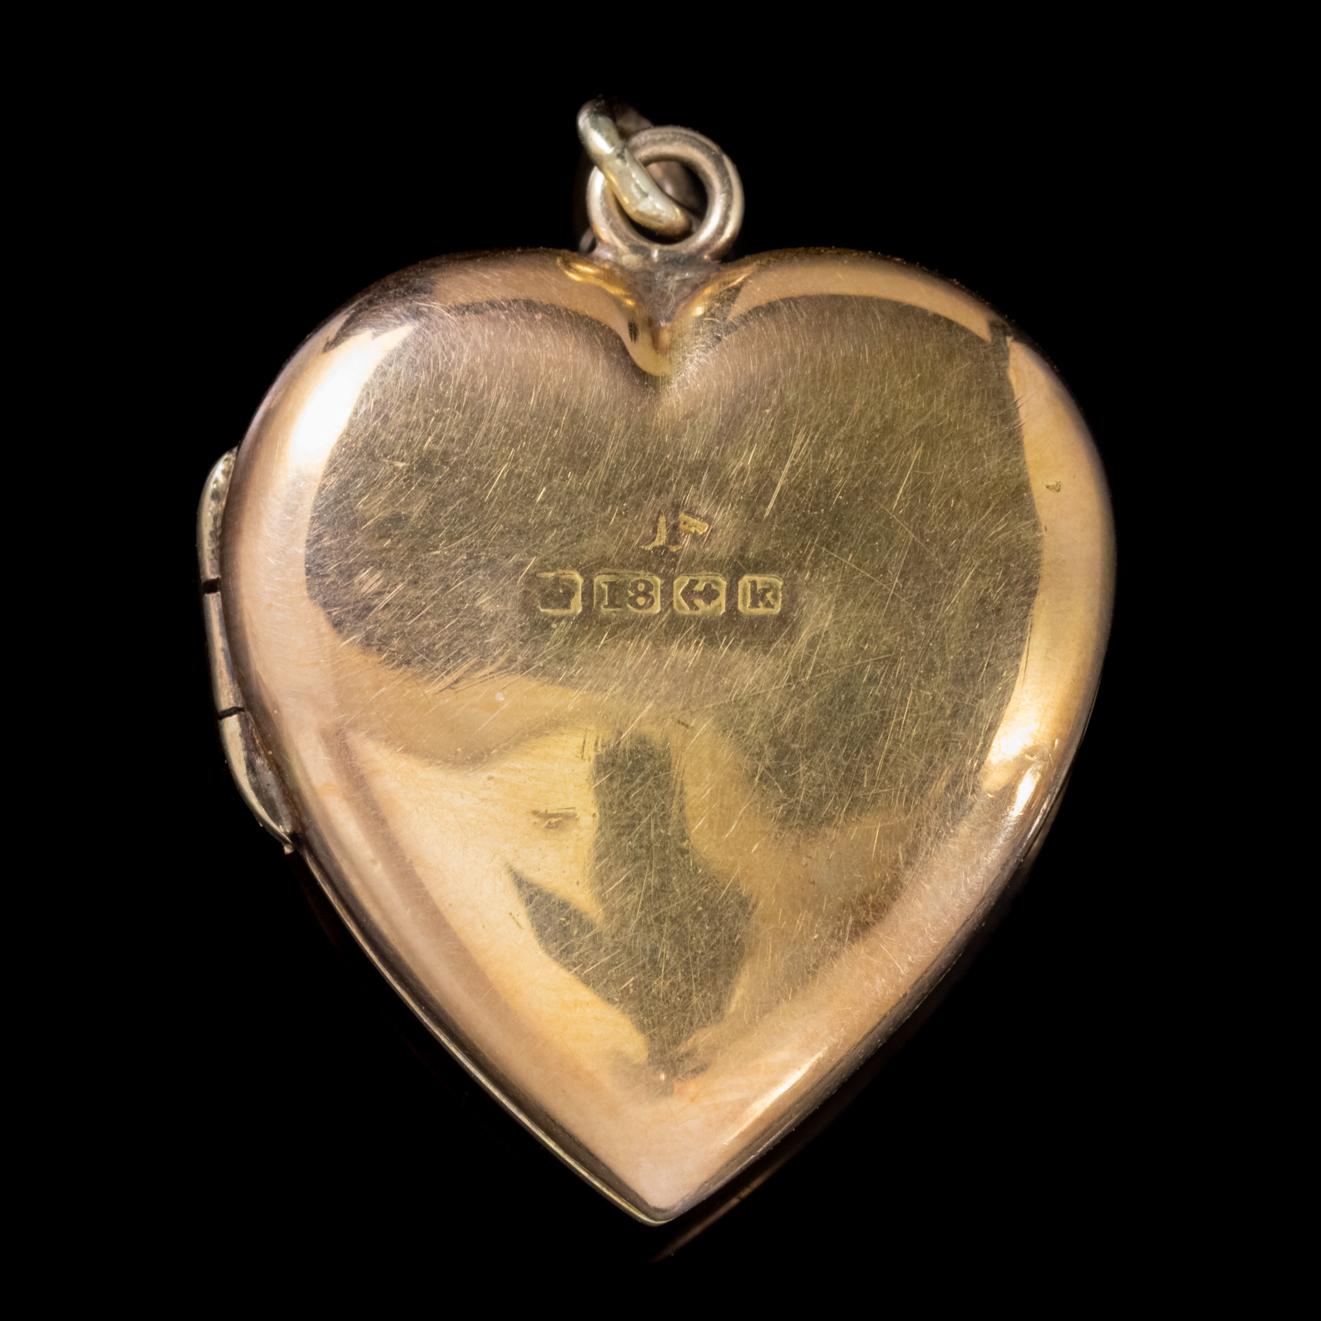 A wonderful Antique Edwardian heart locket featuring a six-pointed star and crescent moon on the front which are set with four approx. 0.08ct old mine cut Diamonds which have a clarity of SI 1 and H colour.

Star and Moon images became popular